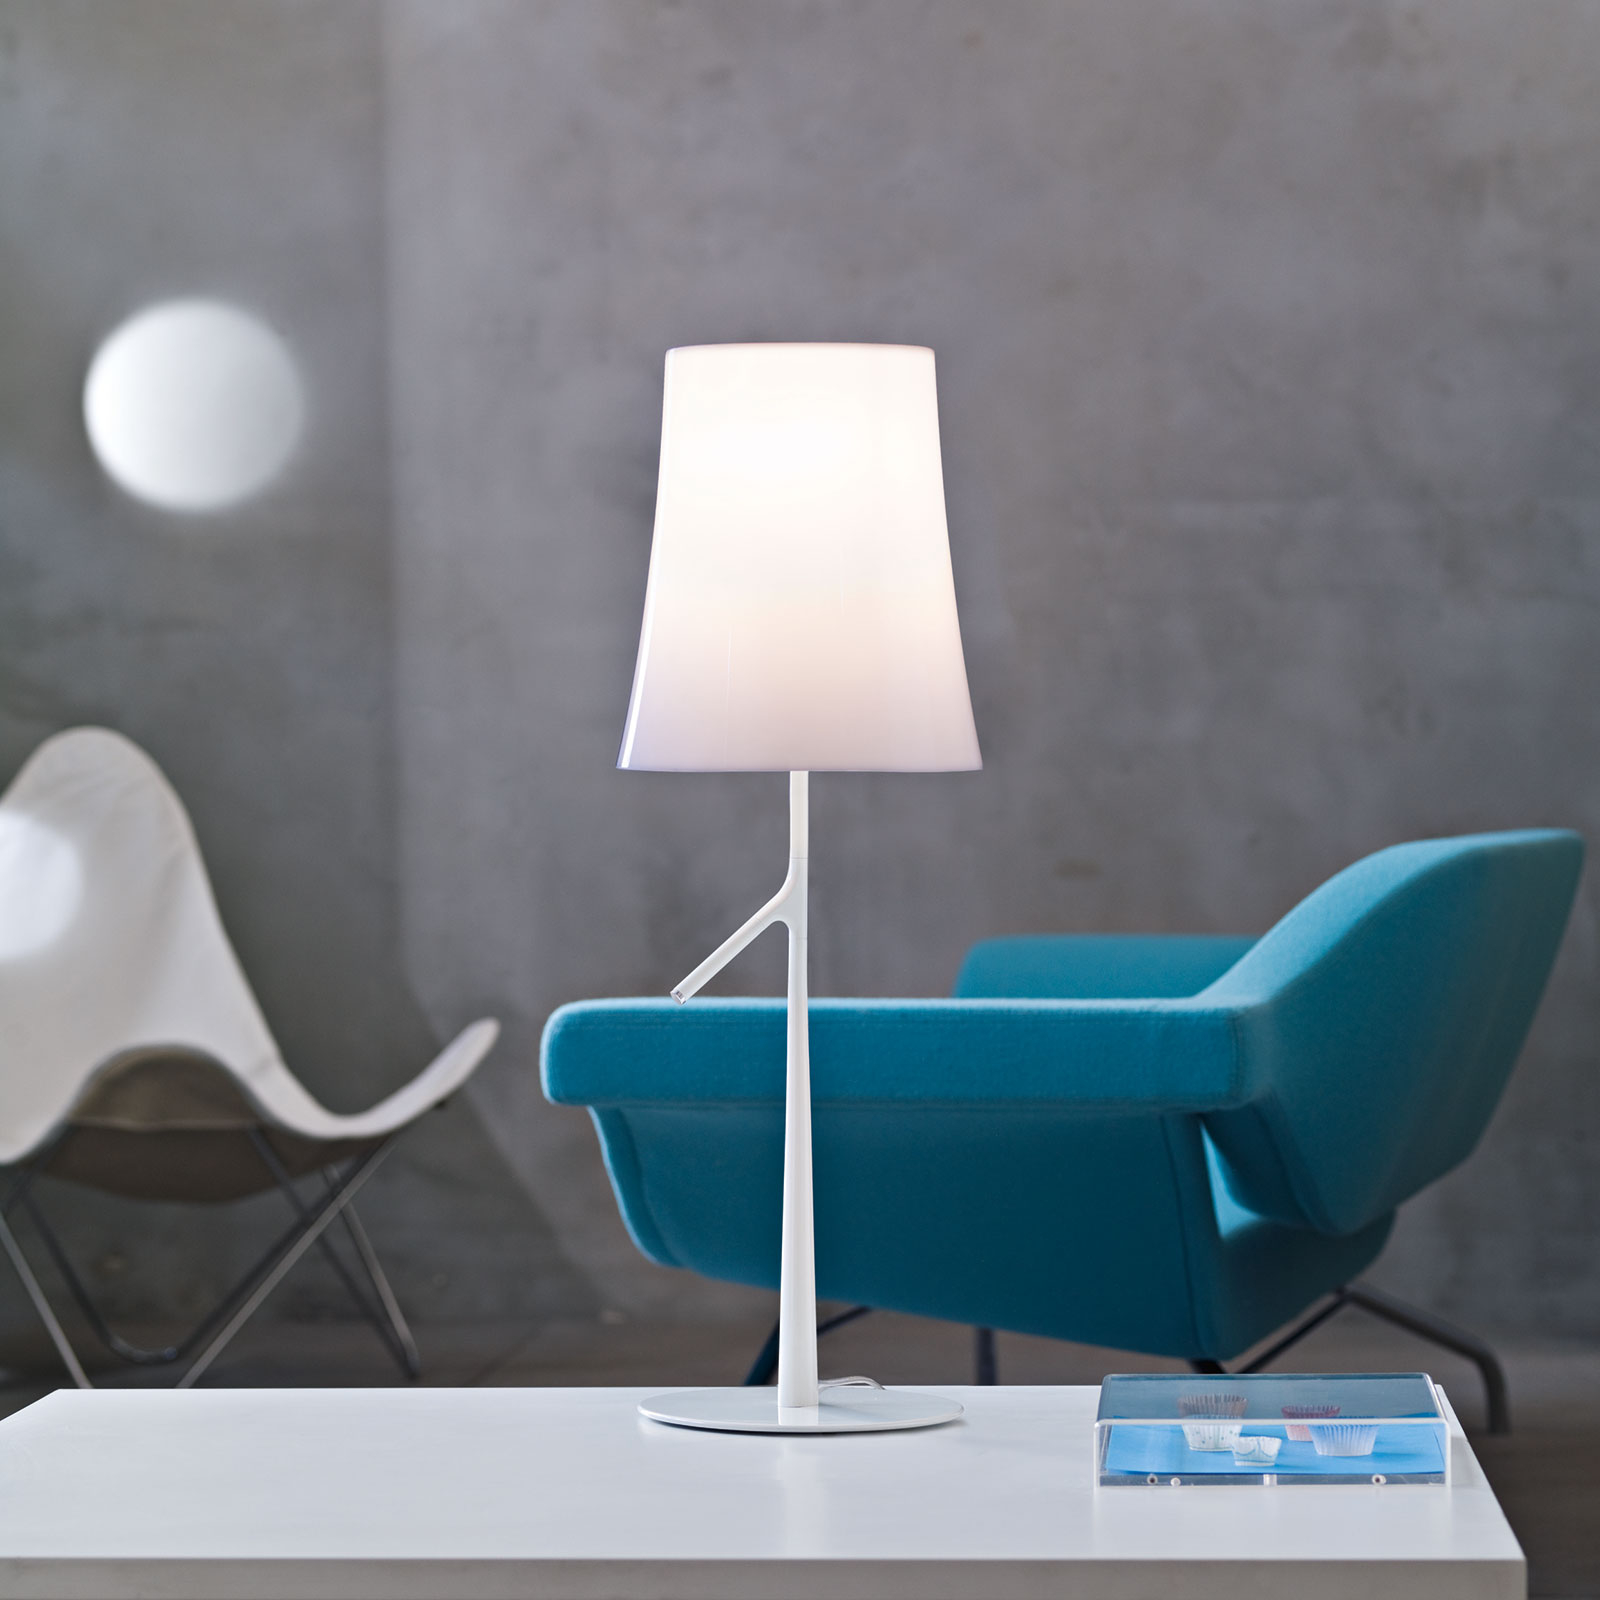 Foscarini Birdie piccola LED table lamp white dimmable